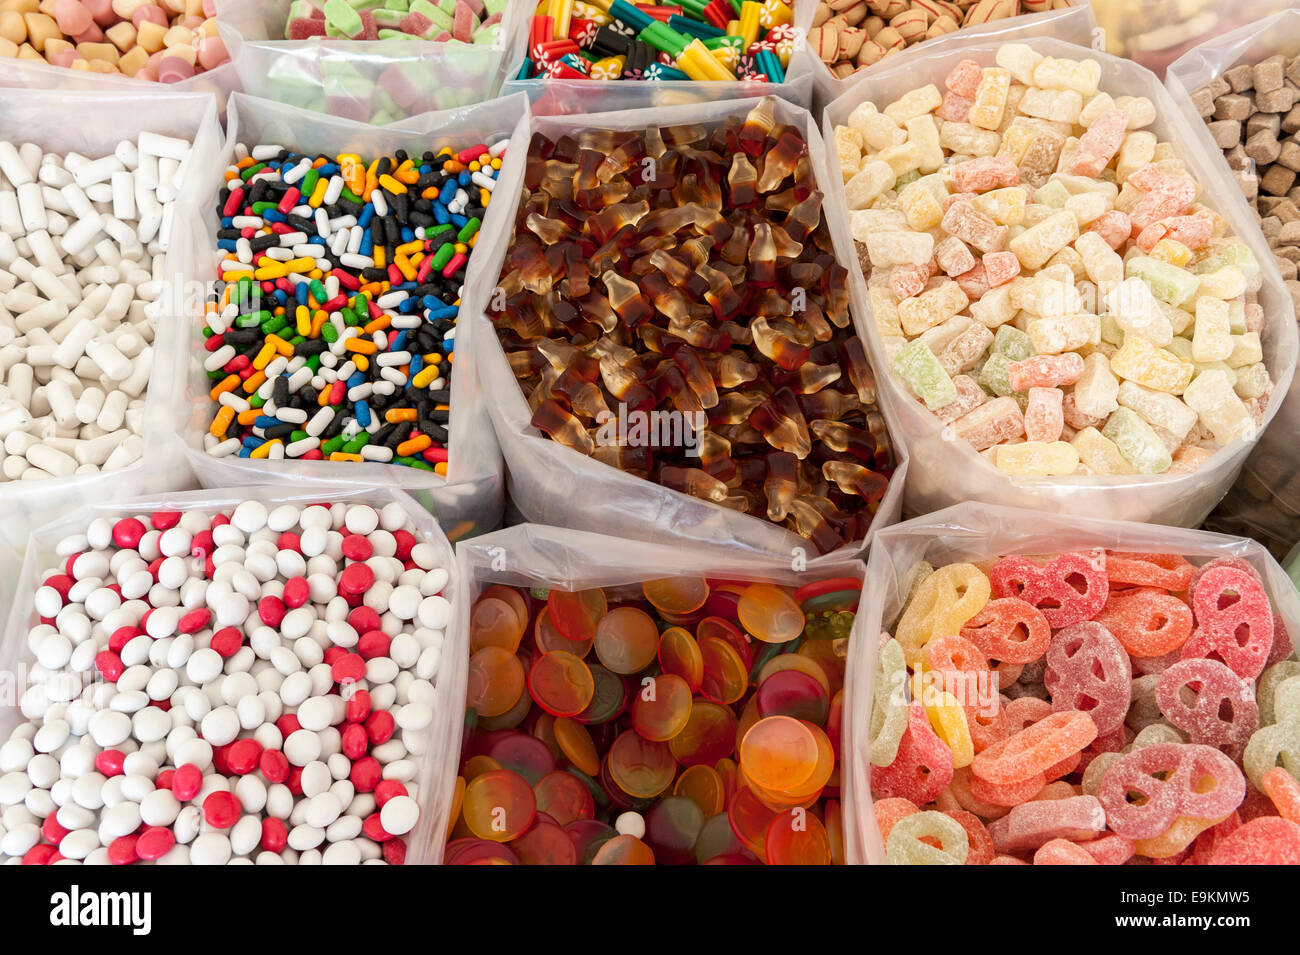 Closeup of sweets in open bags at a market in Amersfoort, Netherlands Stock Photo